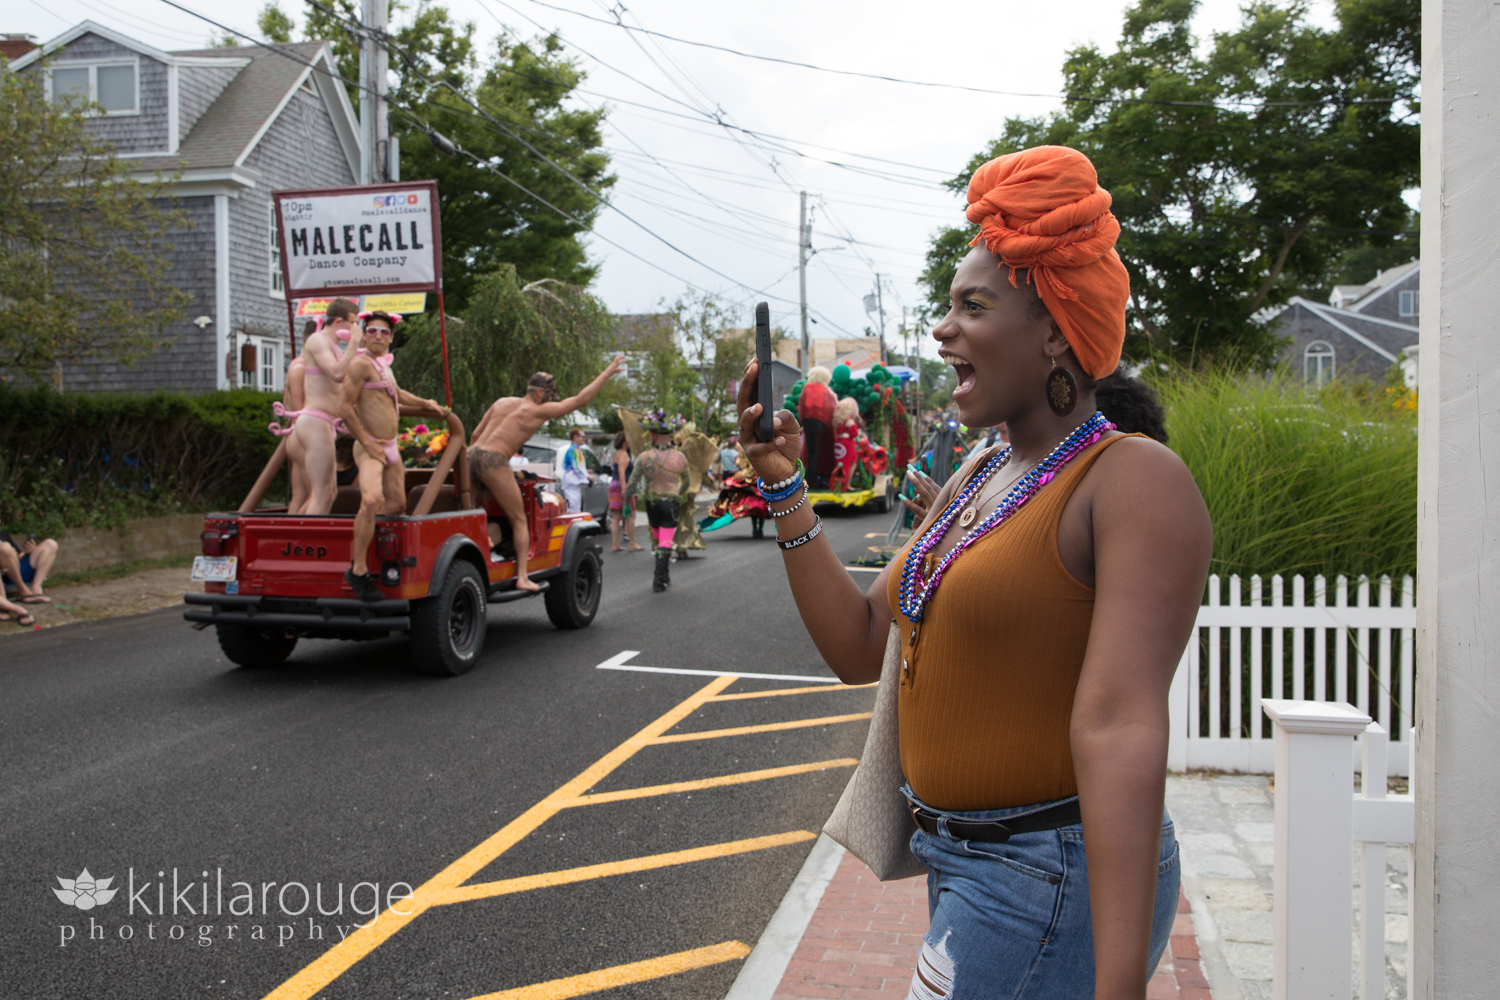 Woman with orange turban smiling and taking a photo at carnival parade